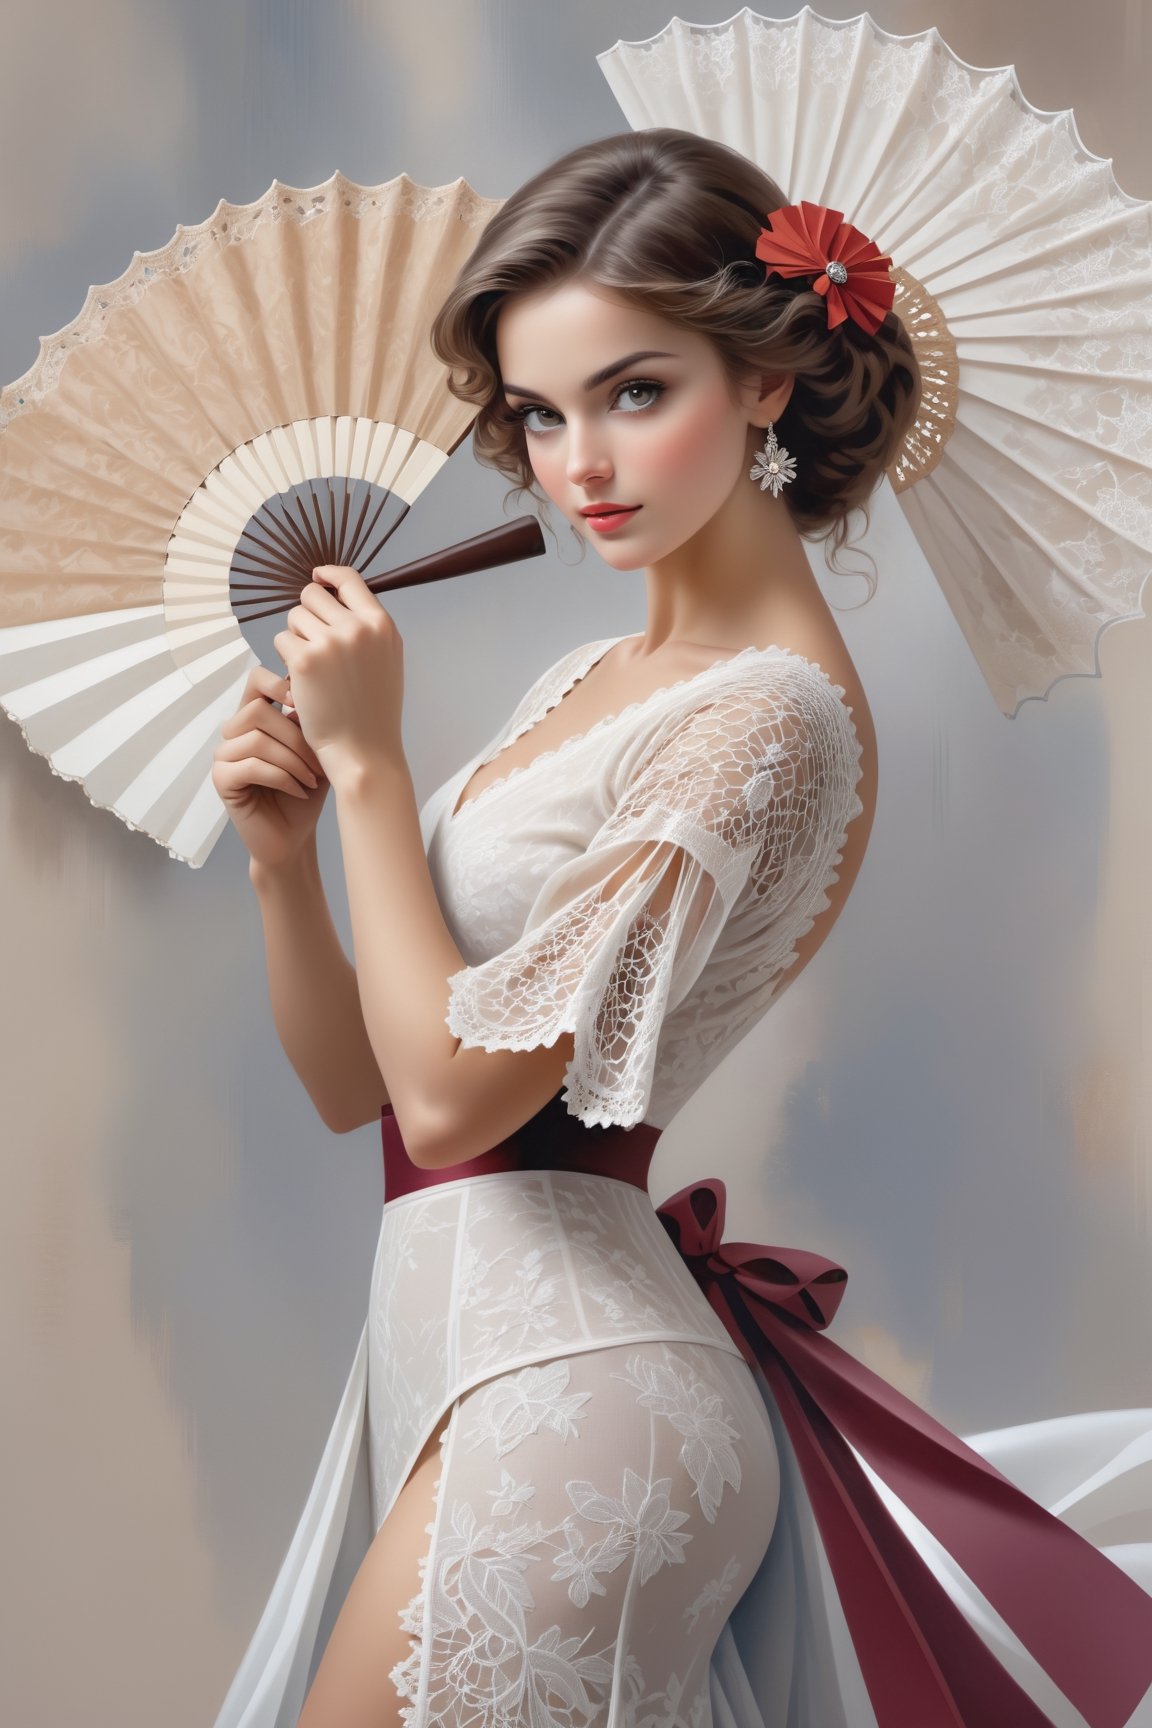 (masterpiece), Slender woman holds her closed Spanish lace fan with her hand, (she places the open fan on her waist, as if it were a belt. This highlights her figure and her style), The image has a geometric art style, with simple shapes and solid colors, which give it an elegant and sober look, real and detailed, highlights the color of your eyes, The image must be high impact, the background must be dark and contrast with the figure of the girl, The image must have a high detail resolution of 8k, (full body), (artistic pose of a woman points the closed Spanish lace fan to something or someone), in 8k quality, the woman shows a confident attitude, romantic style, real and detailed, highlights the color of your eyes, The image must be high impact, The image must have a high detail 8k resolution, image (full body), (artistic pose of a woman),Leonardo Style,A girl dancing 